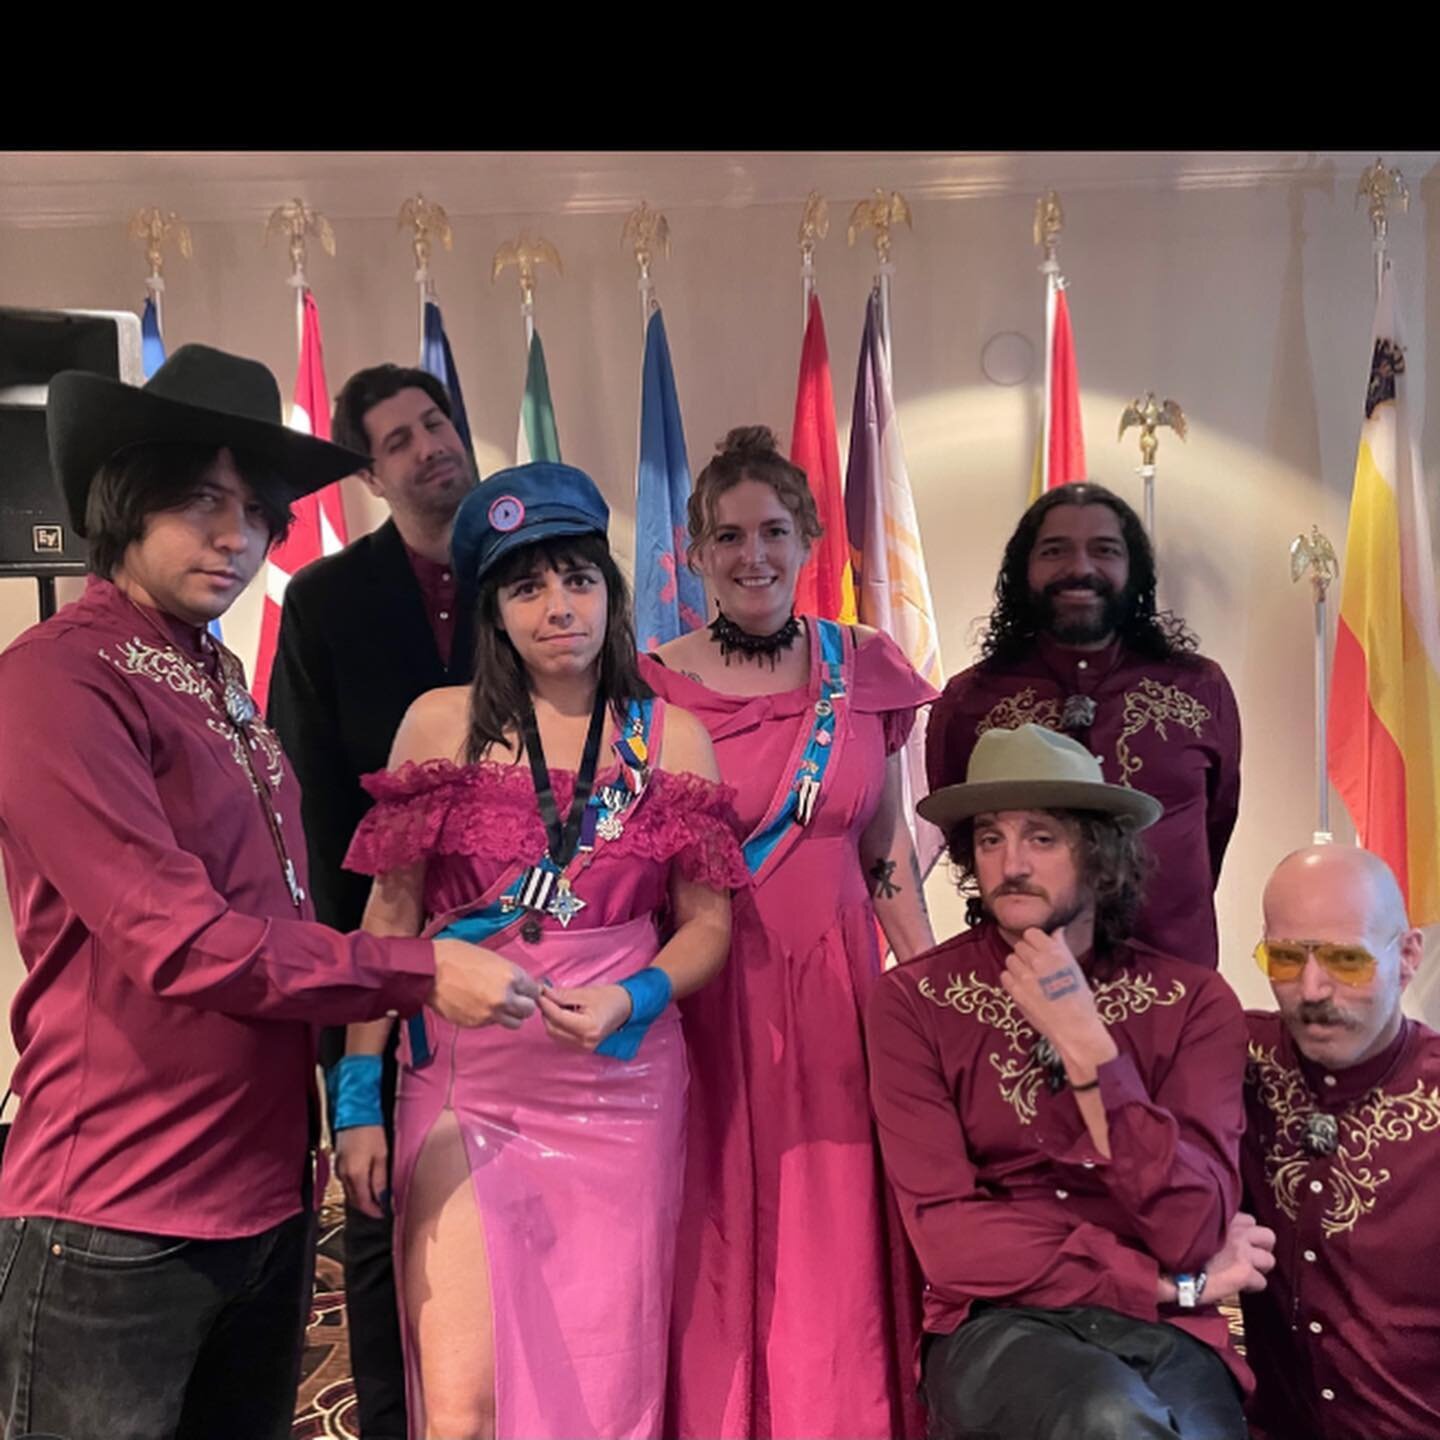 Recovering from an amazing weekend at the Micronational conference - What a beautiful experience to see familiar faces and to meet our new ally Zaqistan!  The First Lady shined at her maiden opportunity to represent our nation to the press. There wer